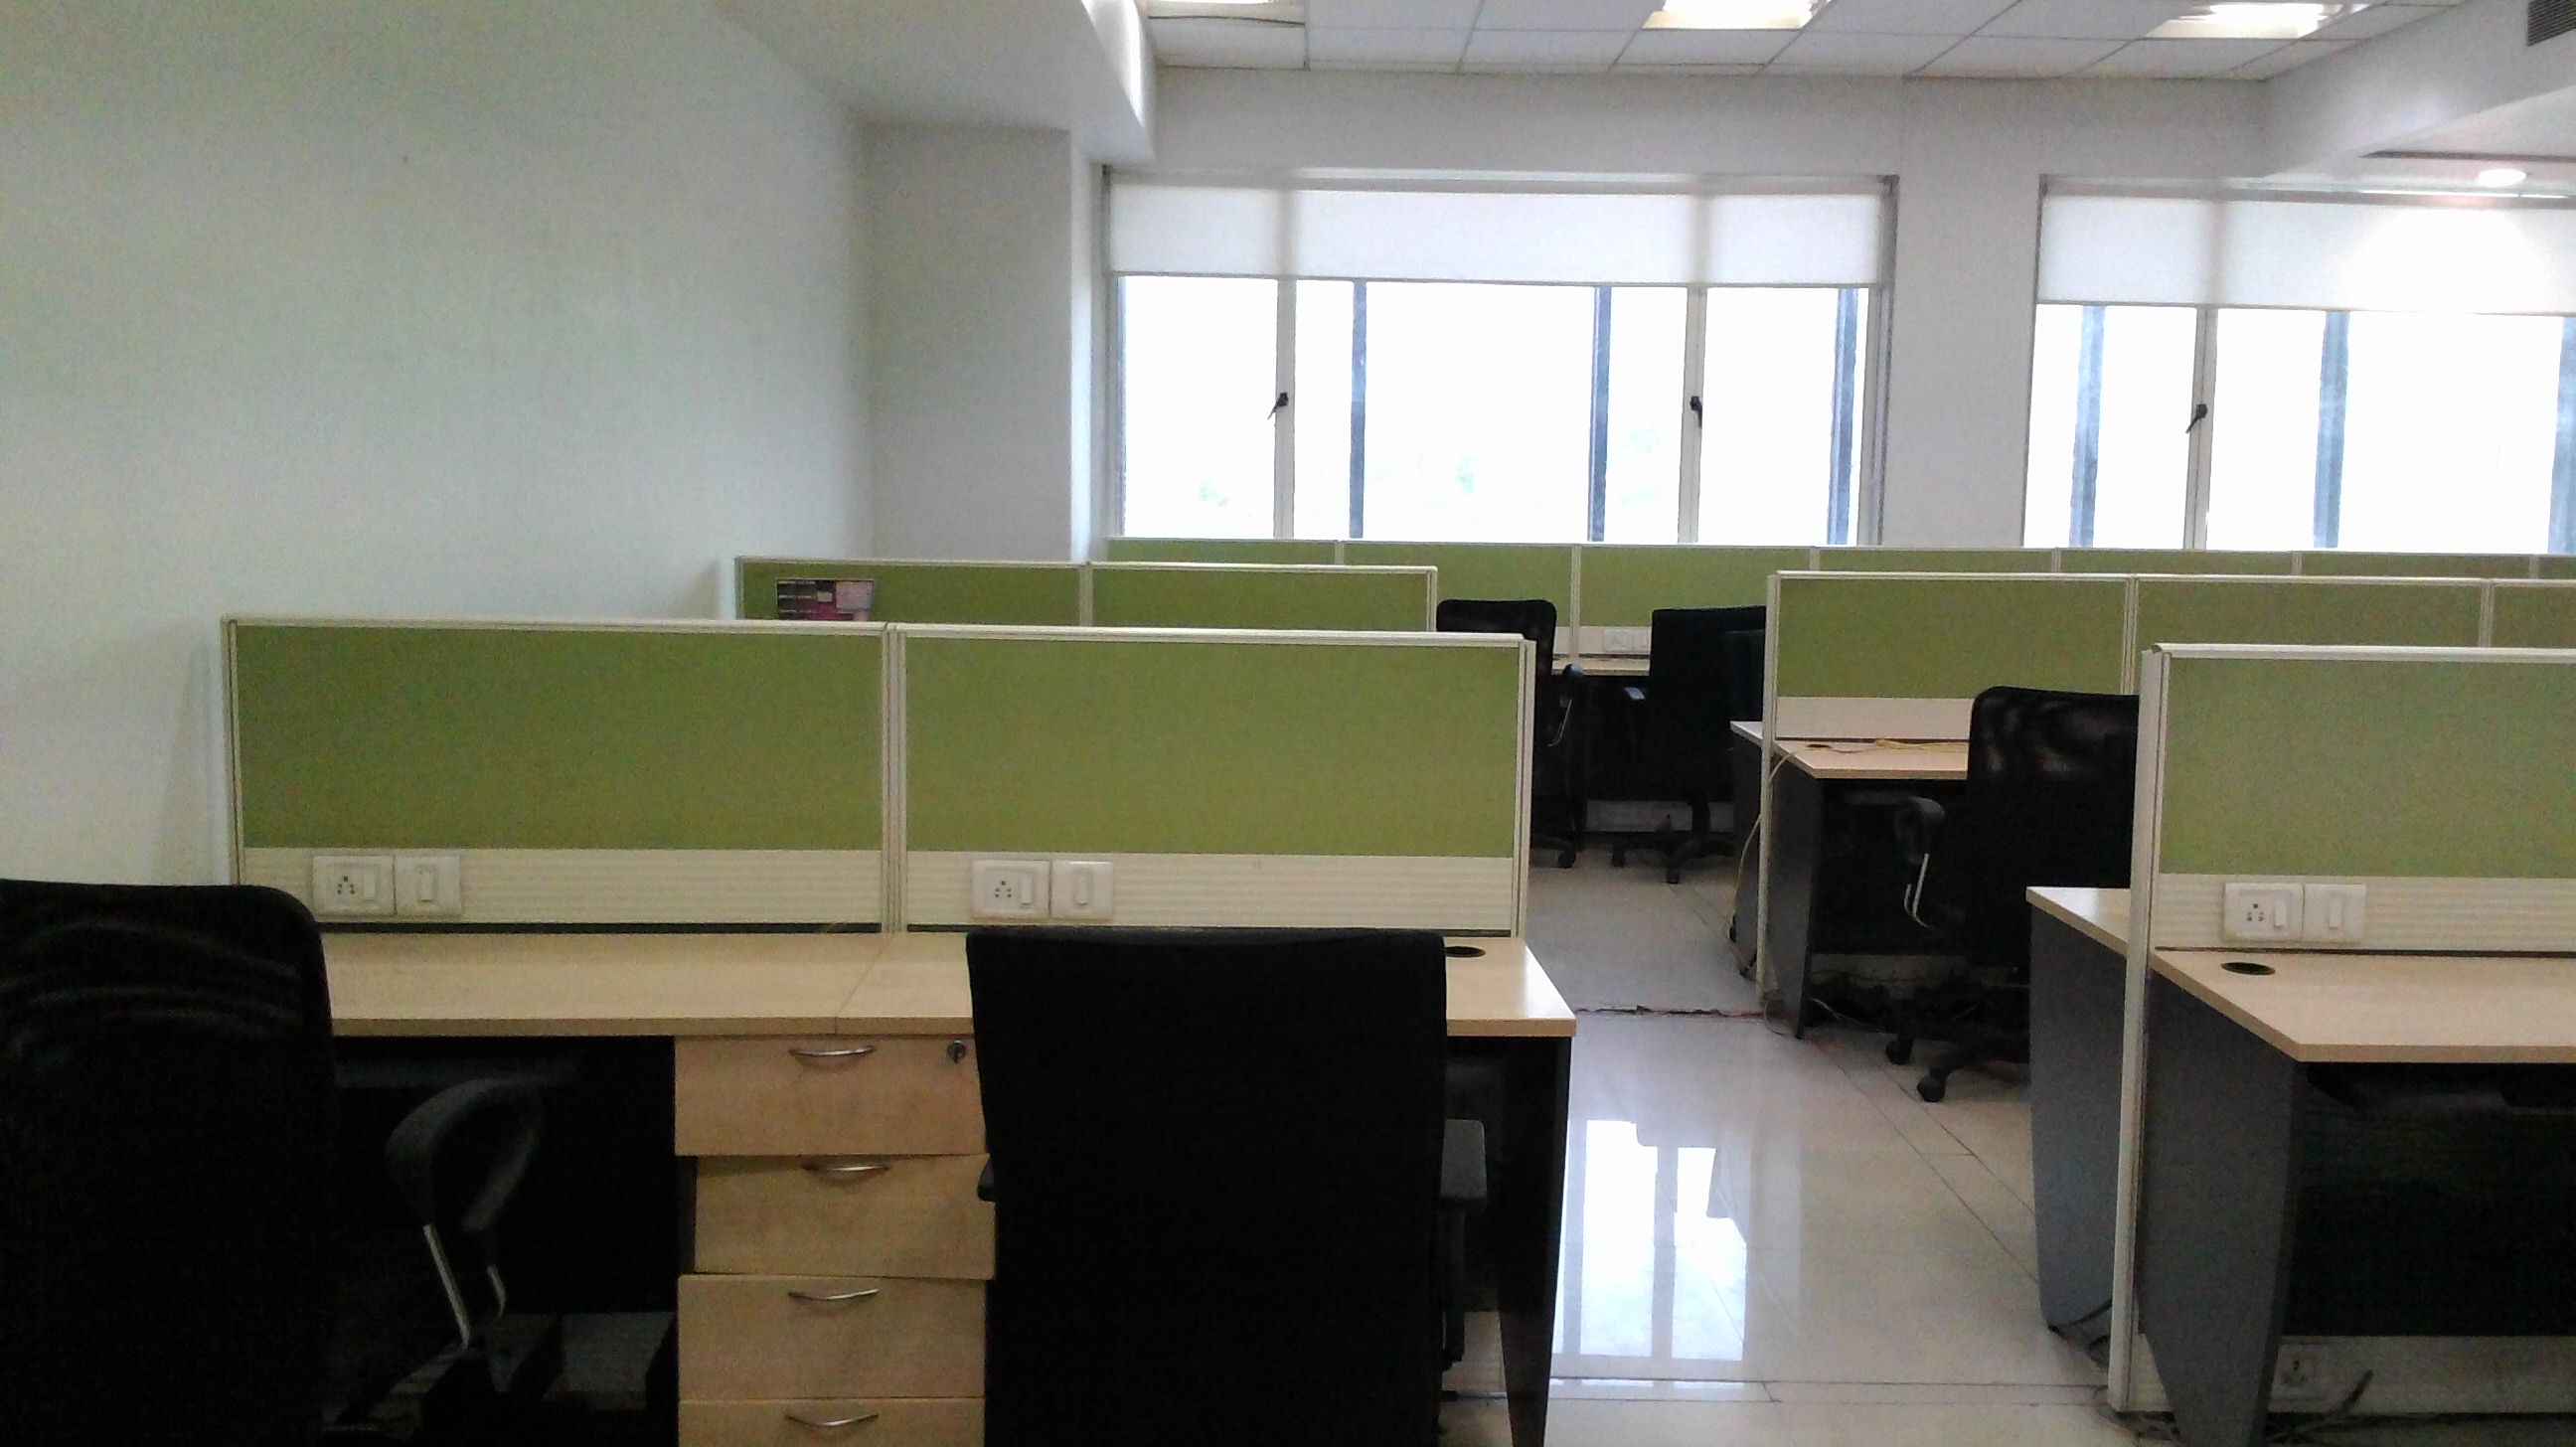 Commercial Office Space for Rent in Orion Business Park,Ghodbunder Road. Near Cinemax, Thane-West, Mumbai